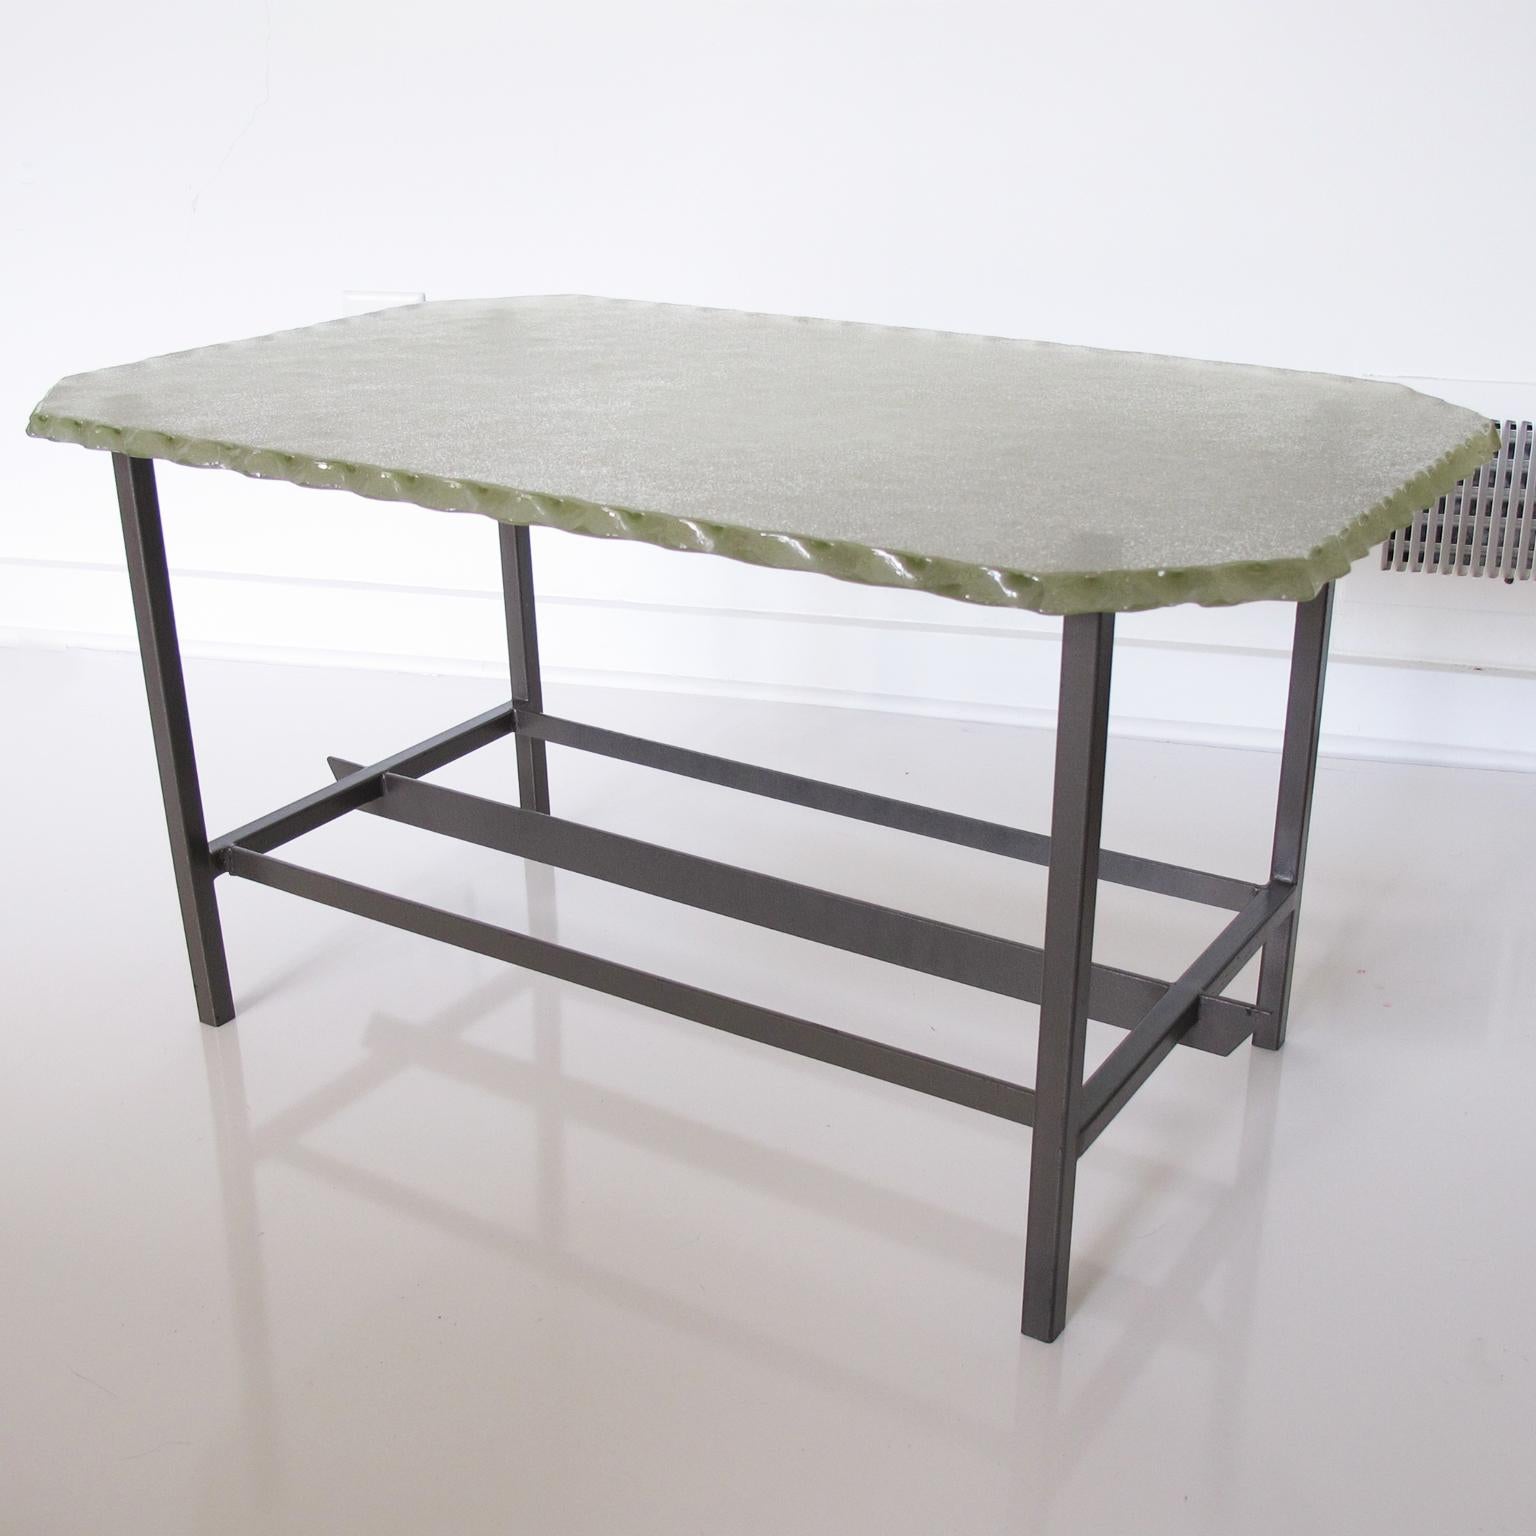 Pietro Chiesa designed this lovely modernist glass and metal coffee table for the renowned Italian manufacturer Fontana Arte in the 1940s. This rectangular coffee table, with its 